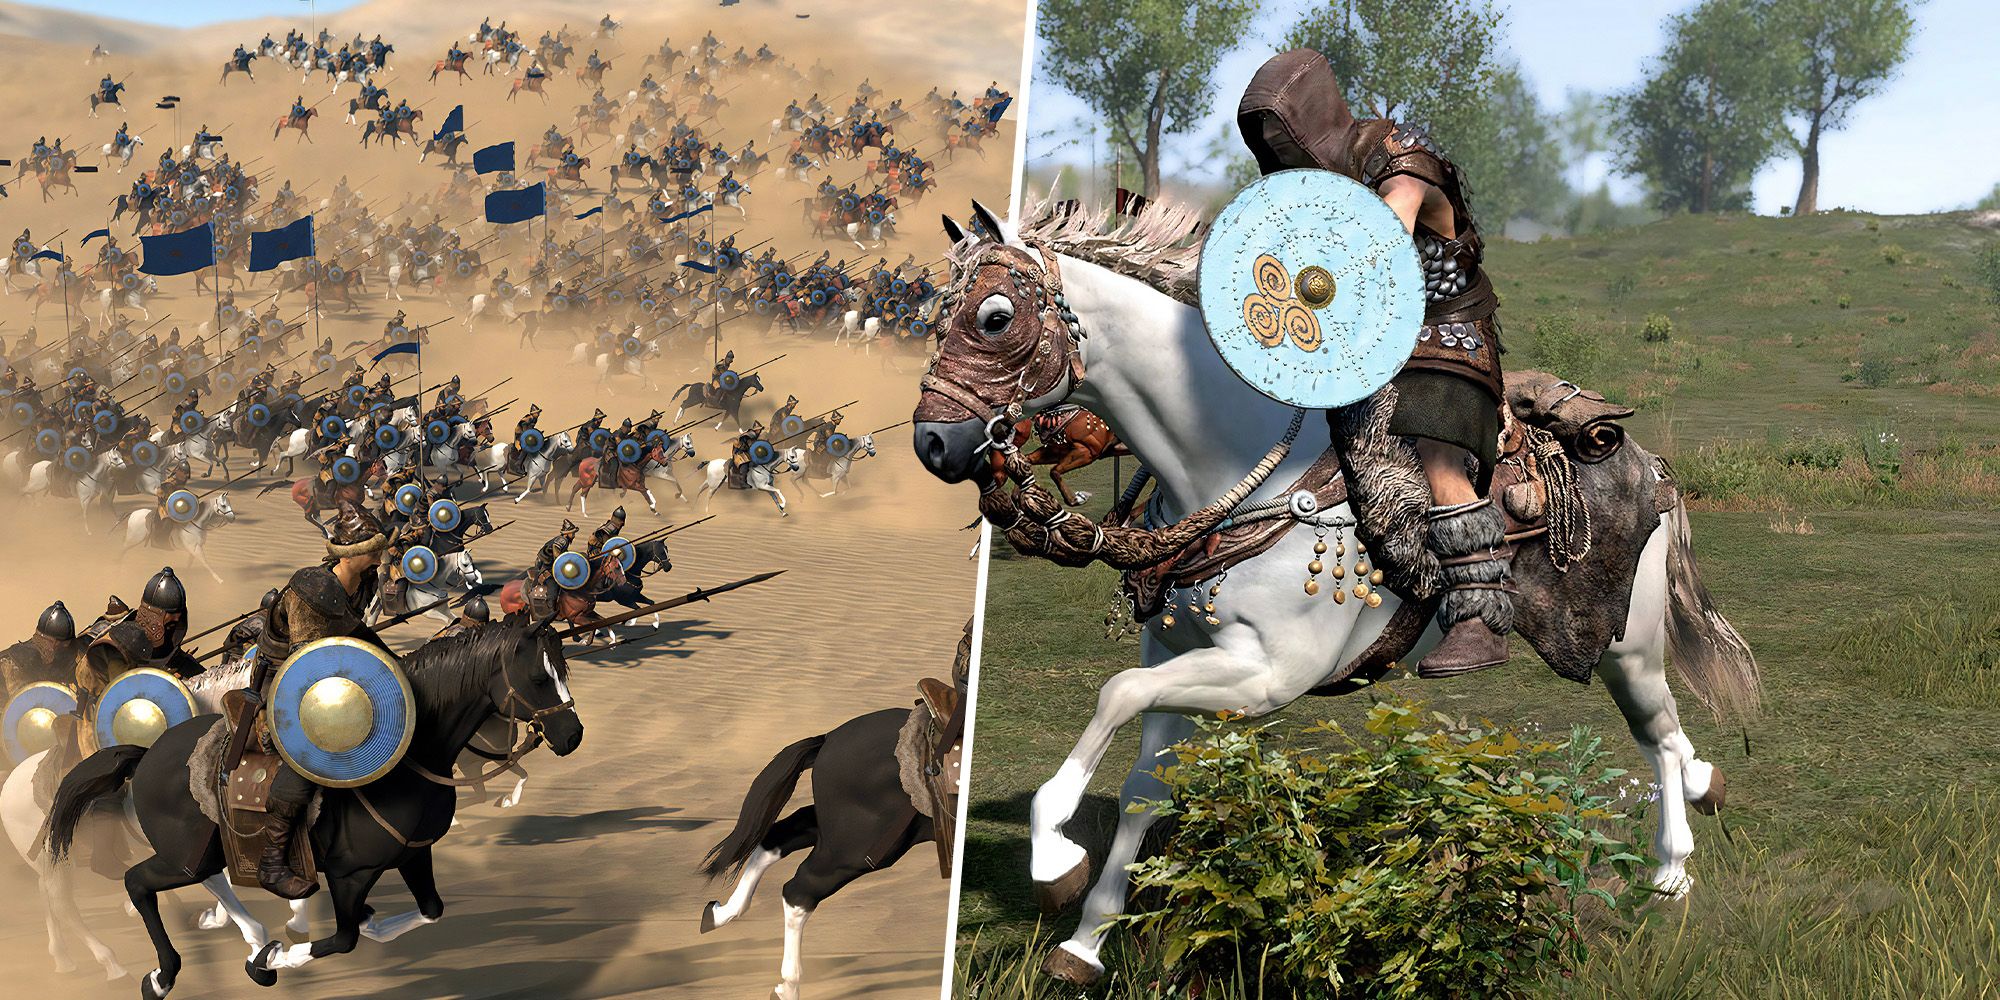 cavalry charging against each other in mount and blade 2